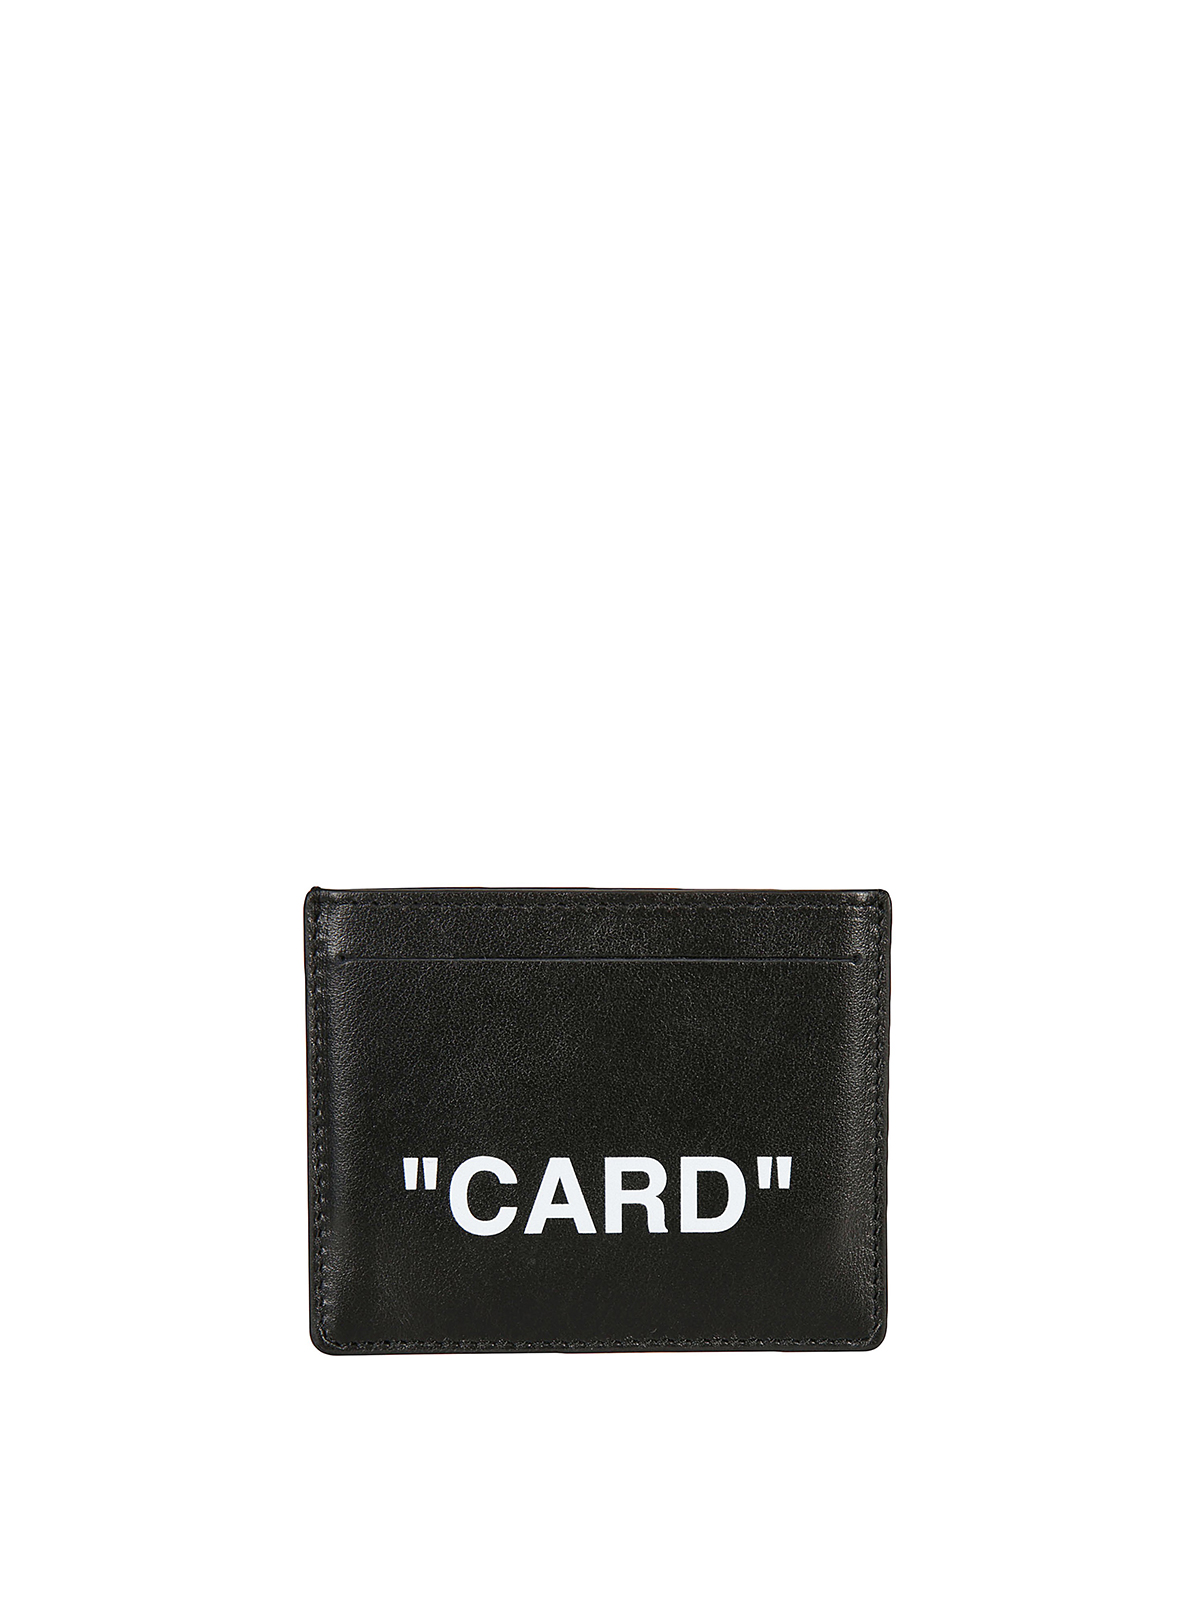 Card glossy leather card holder